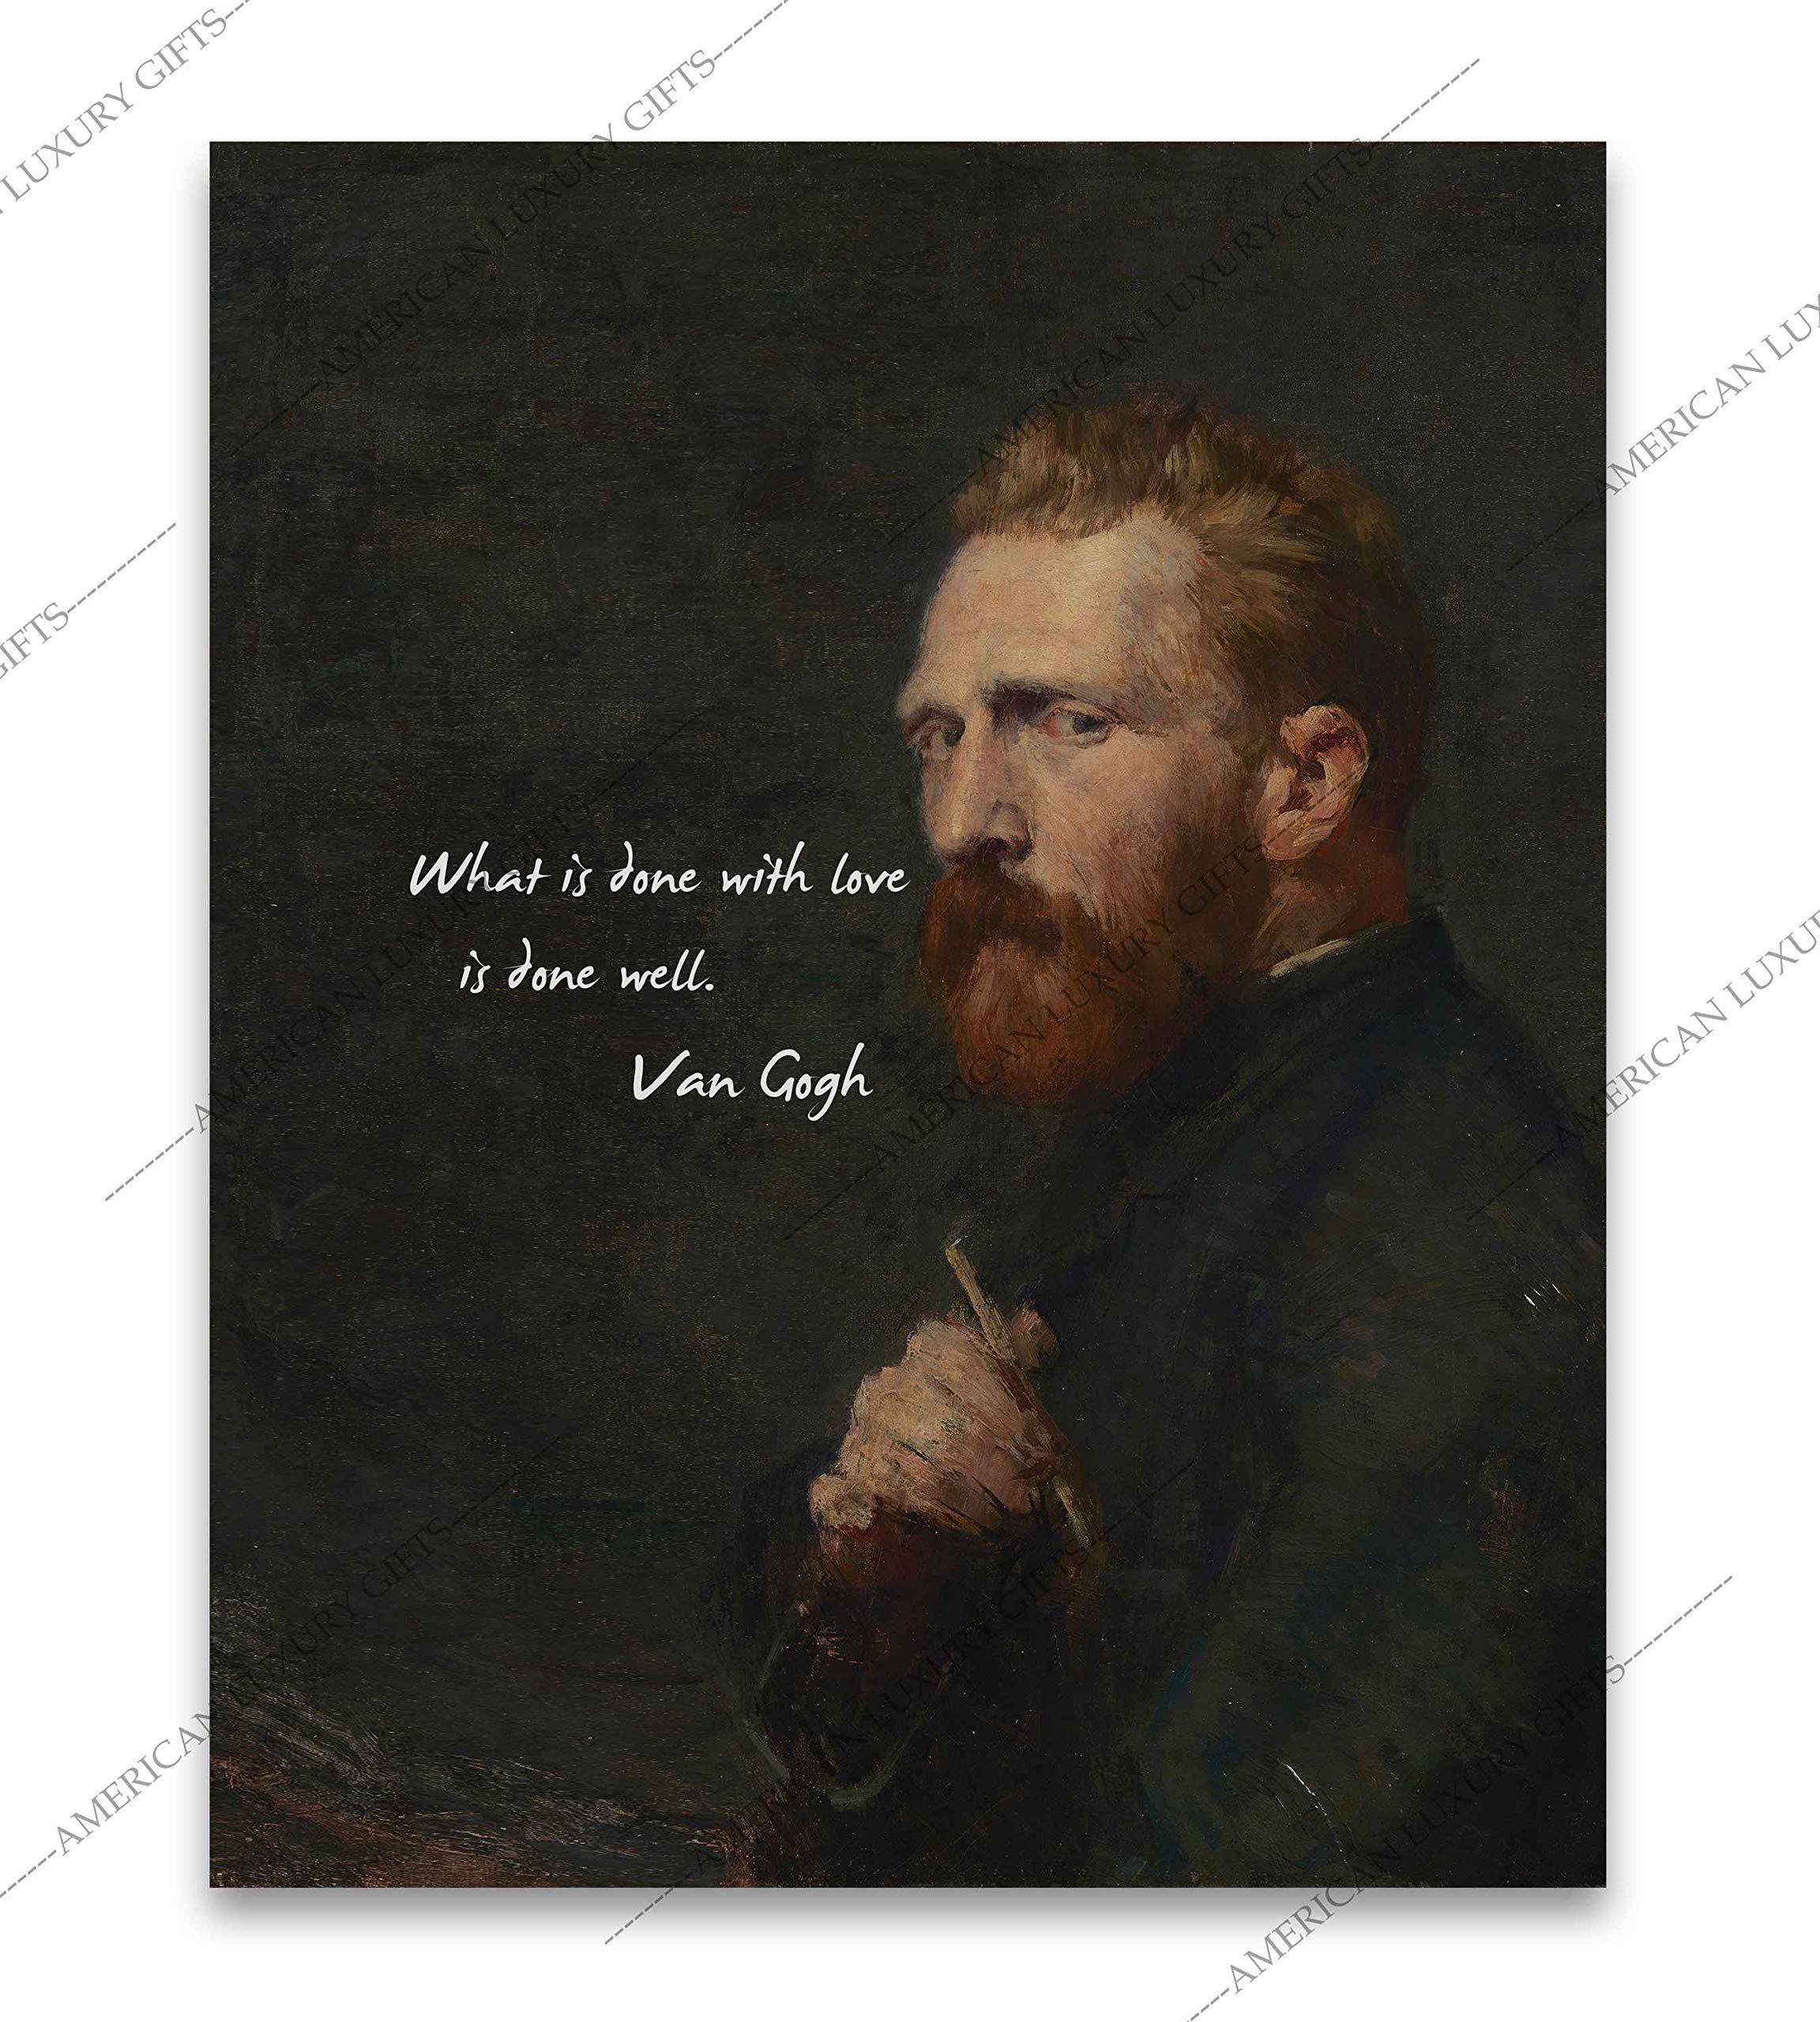 Van Gogh “What Is Done” - Inspirational Wall Art, Encouraging Oil Painting Wall Decor, Vintage Motivational Wall Art Is Perfect for Living Room Decor, Office Décor, Home Décor, Unframed- 8x10"